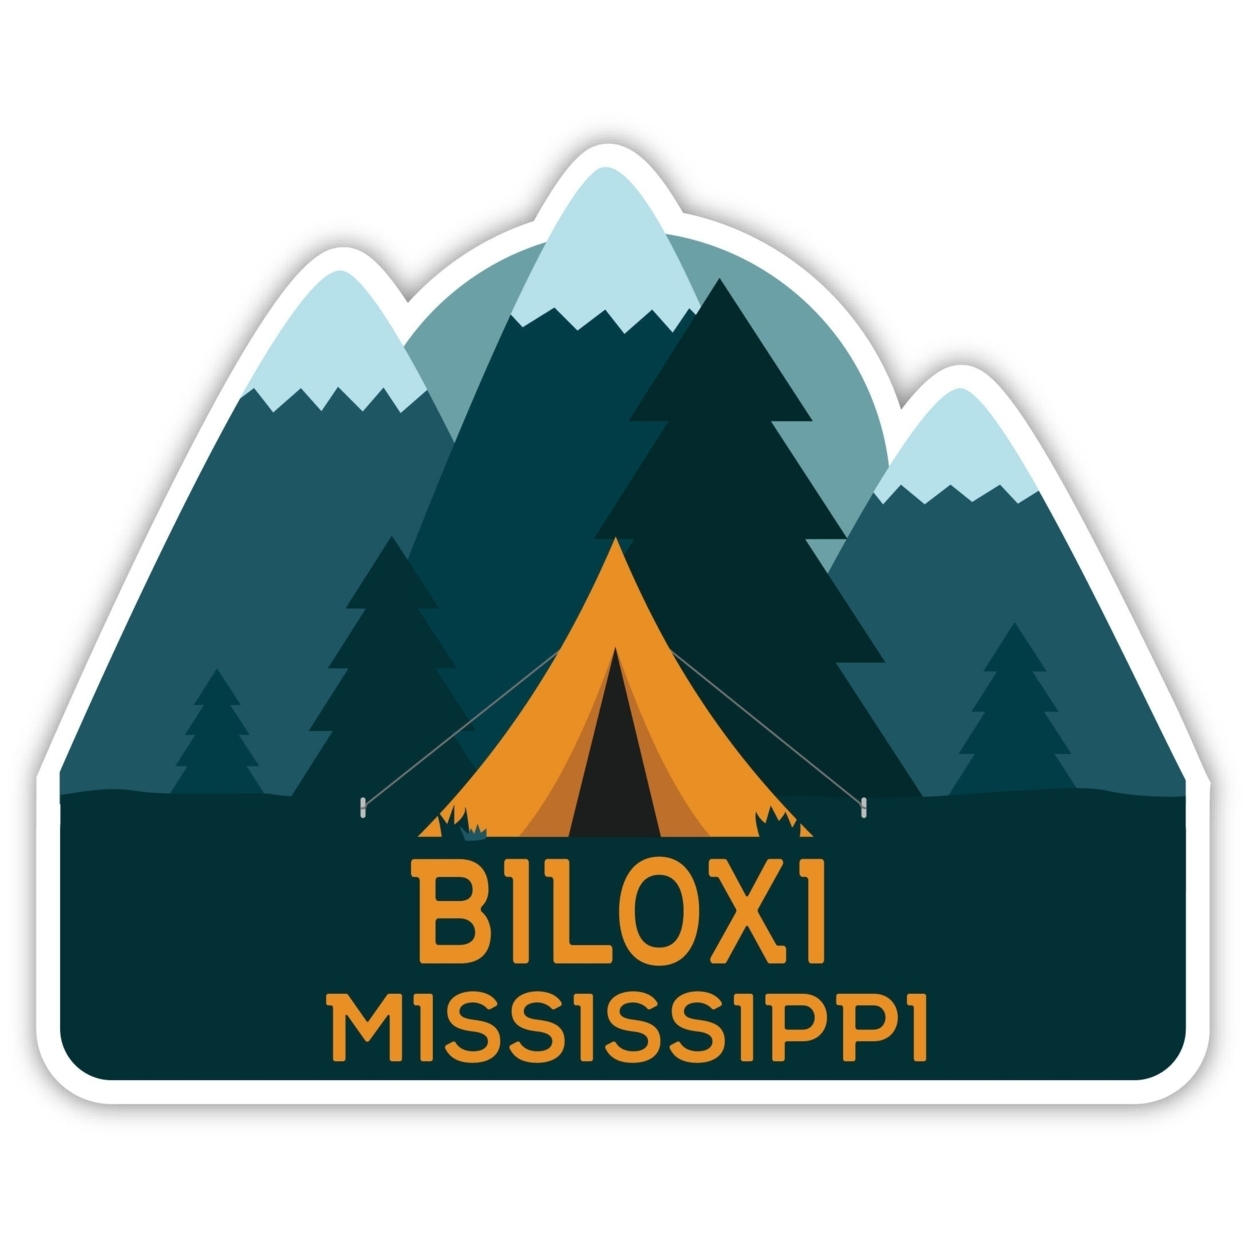 Biloxi Mississippi Souvenir Decorative Stickers (Choose Theme And Size) - 4-Pack, 8-Inch, Bear